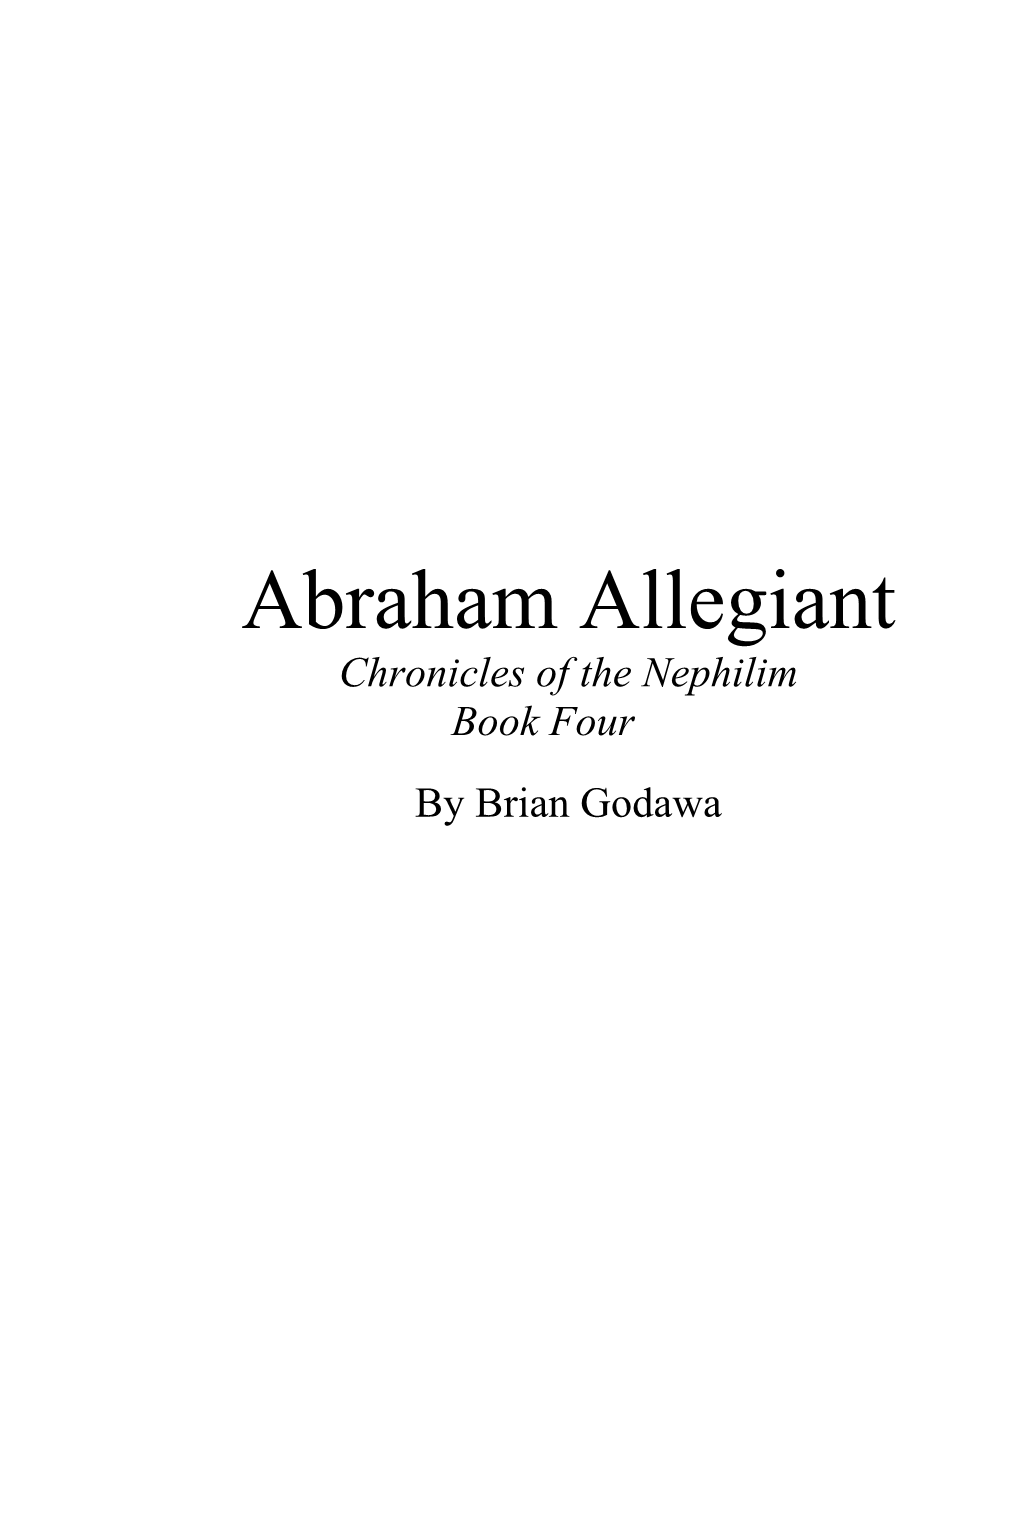 Abraham Allegiant Chronicles of the Nephilim Book Four by Brian Godawa